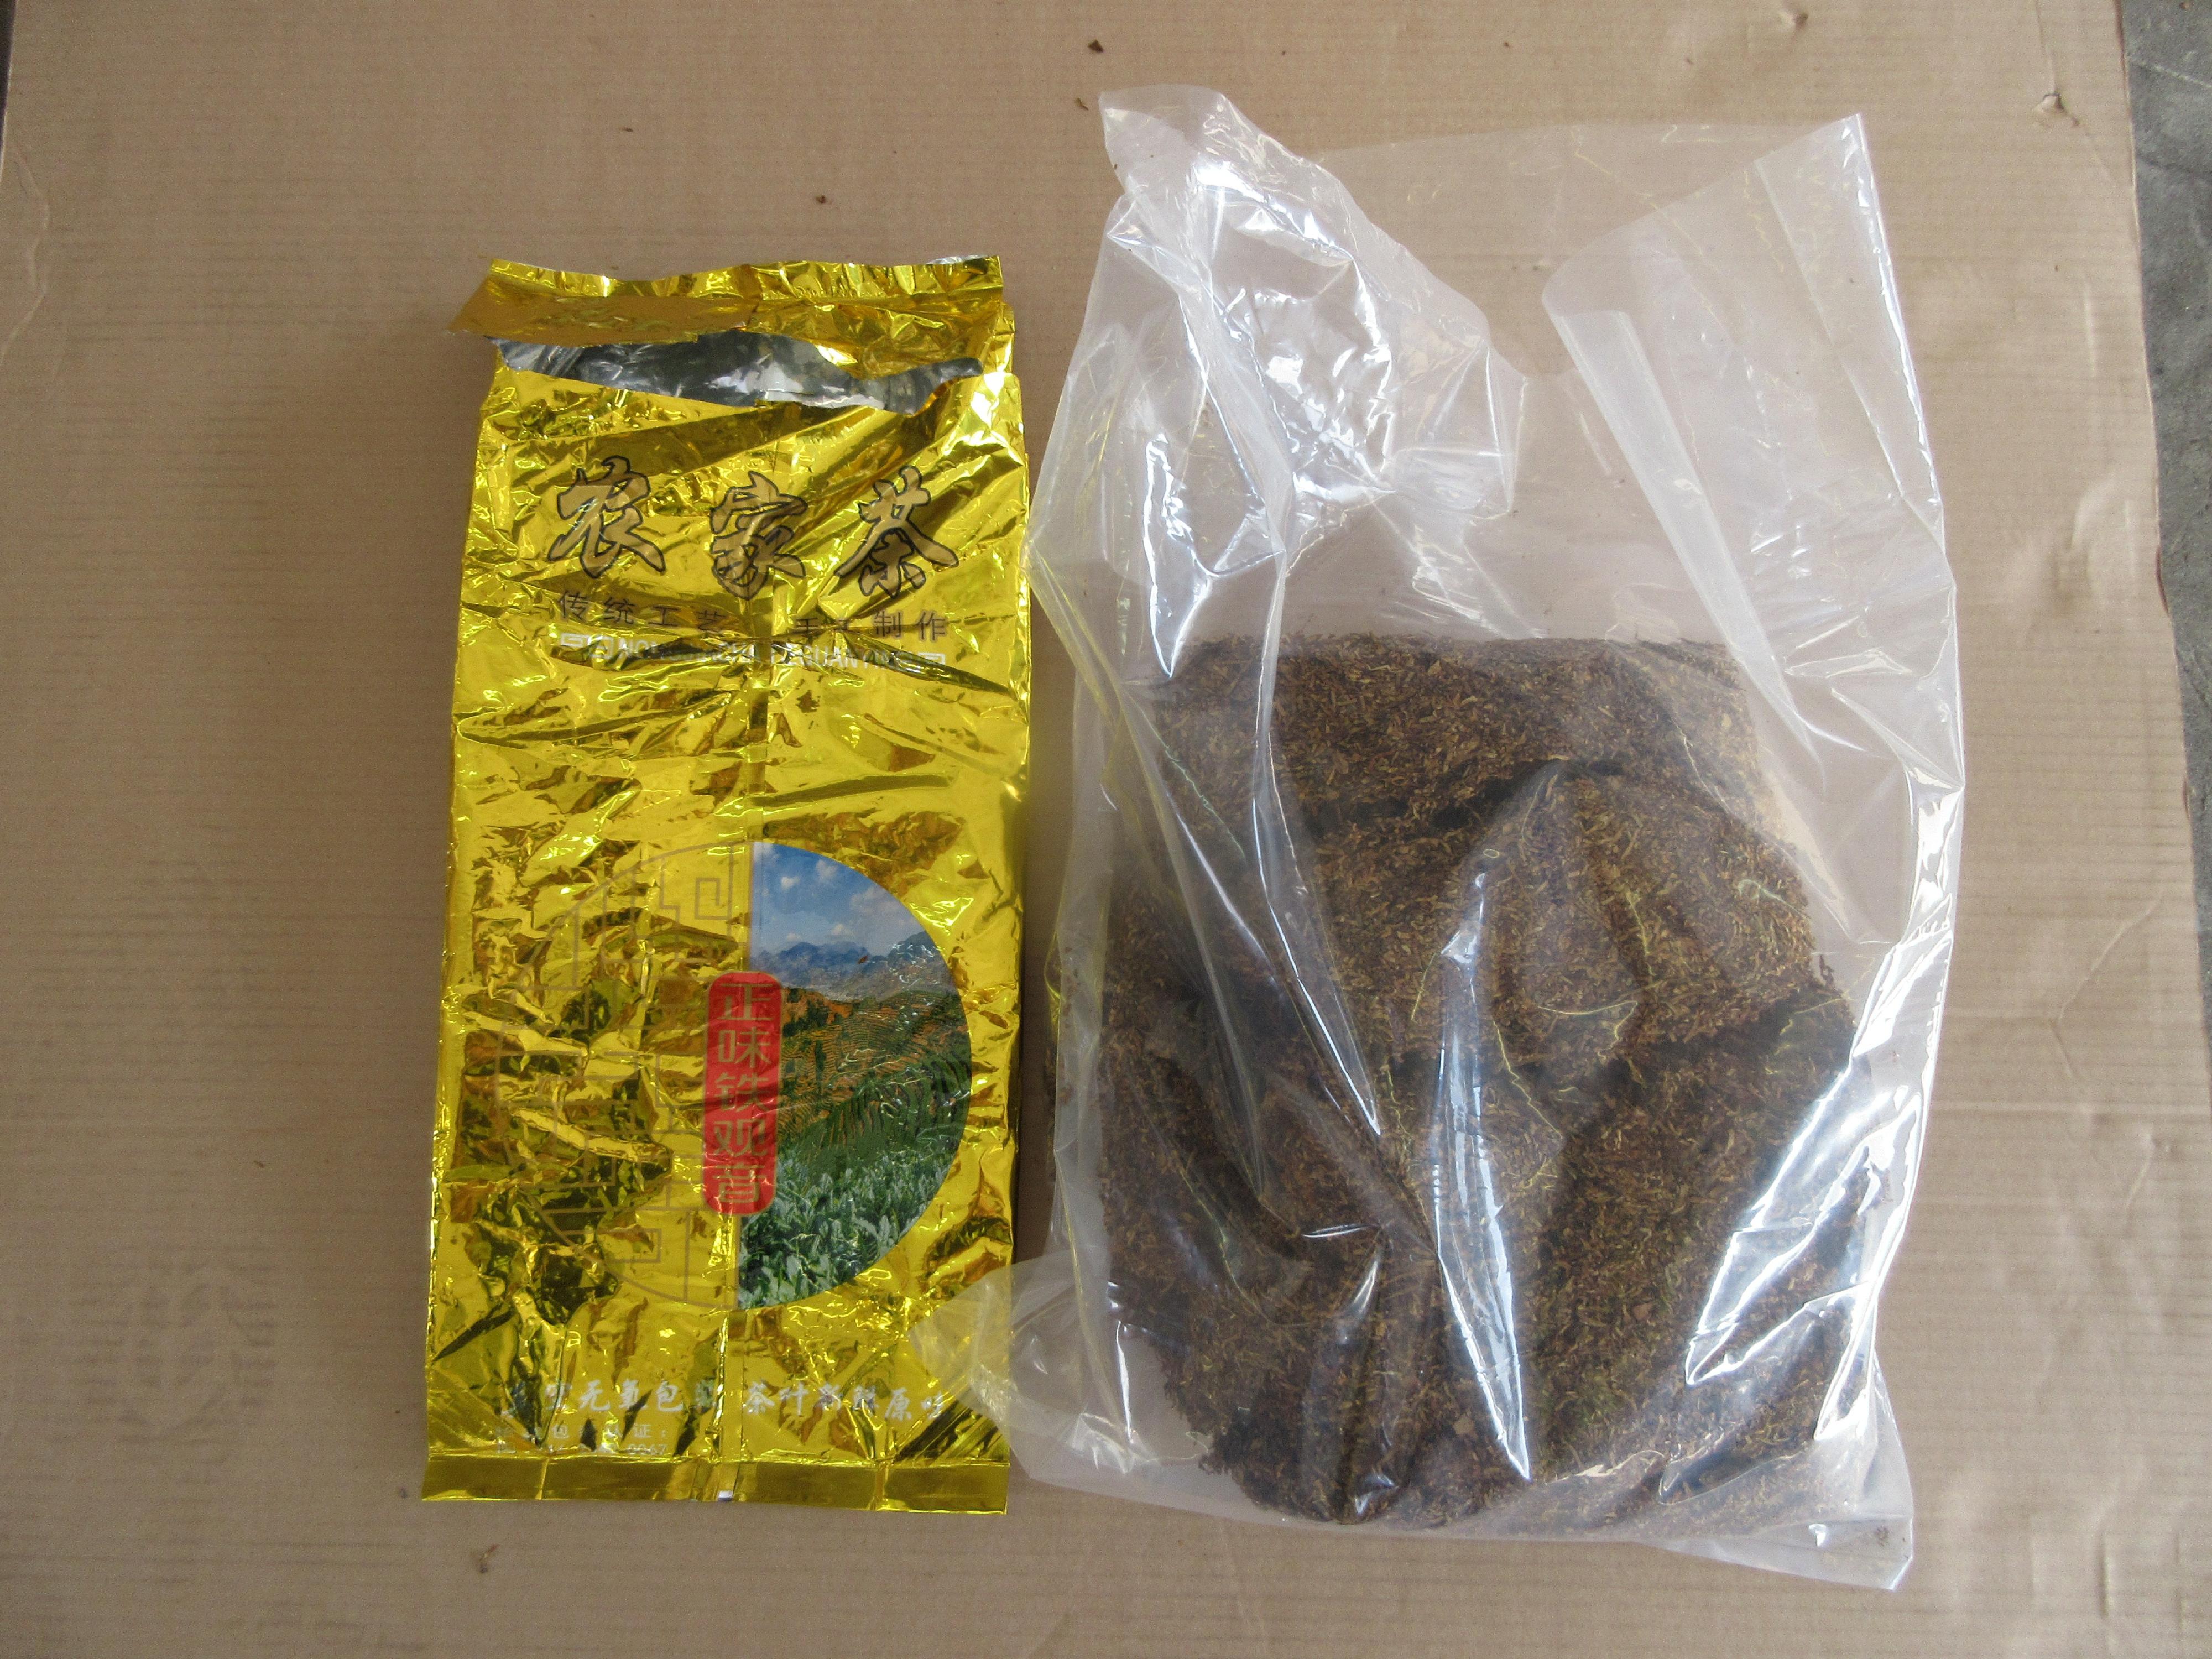 Hong Kong Customs detected two suspected smuggling cases at the Kwai Chung Customhouse Cargo Examination Compound on June 2 and yesterday (June 5). A total of about 11.6 tonnes of suspected duty-not-paid manufactured tobacco, with an estimated market value of over $52 million and a duty potential of about $35 million, were seized. Photo shows some suspected duty-not-paid manufactured tobacco packed in a tea leaf packaging bag found by Customs officers in the second case.